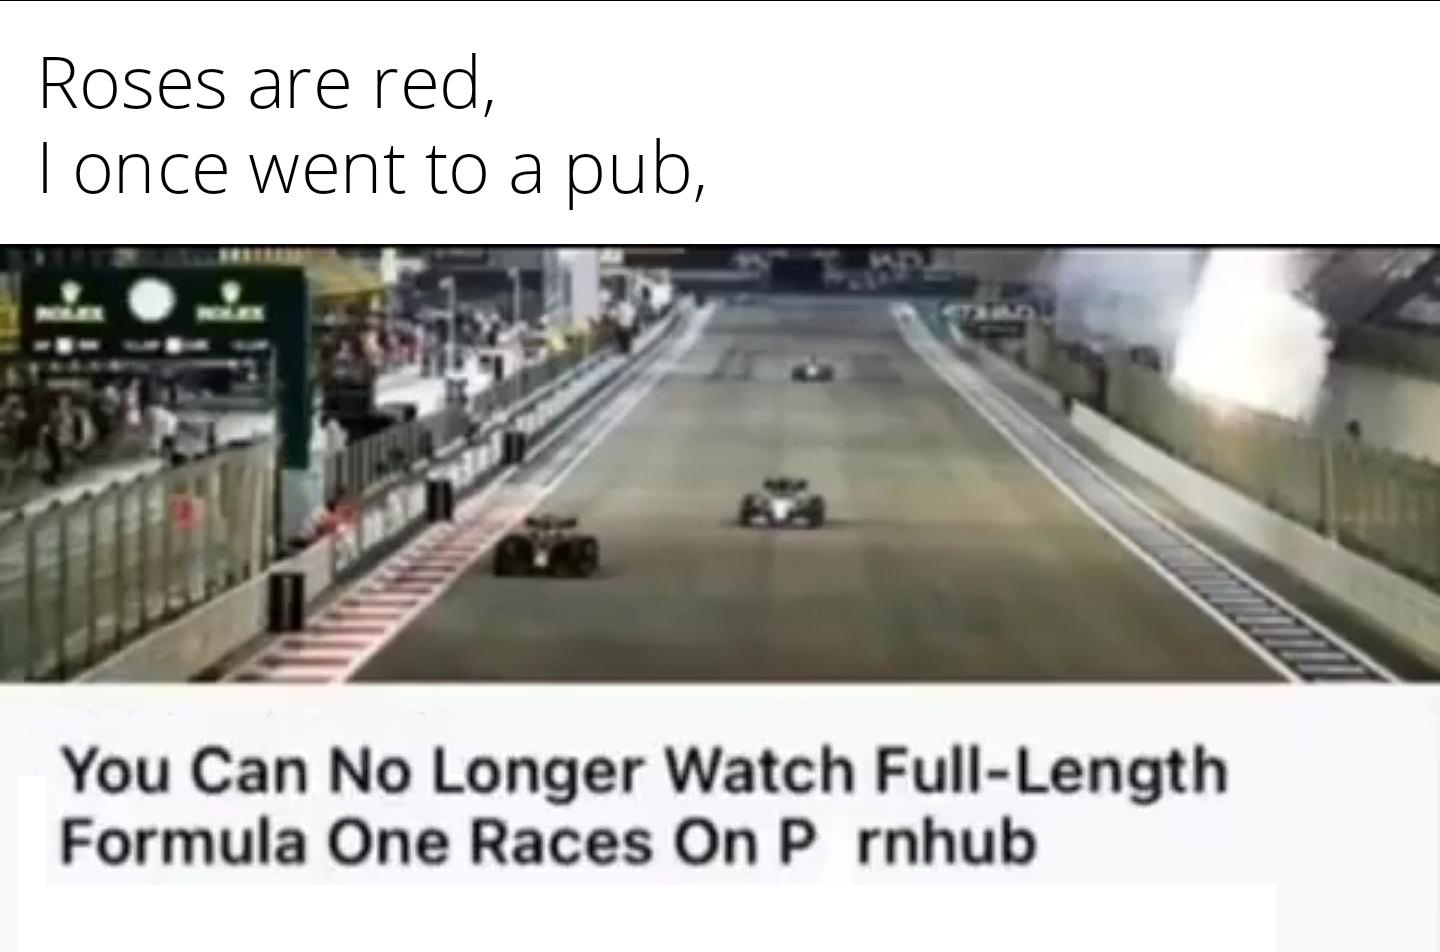 gaming memes  - screw length - Roses are red, I once went to a pub, You Can No Longer Watch FullLength Formula One Races On P rnhub